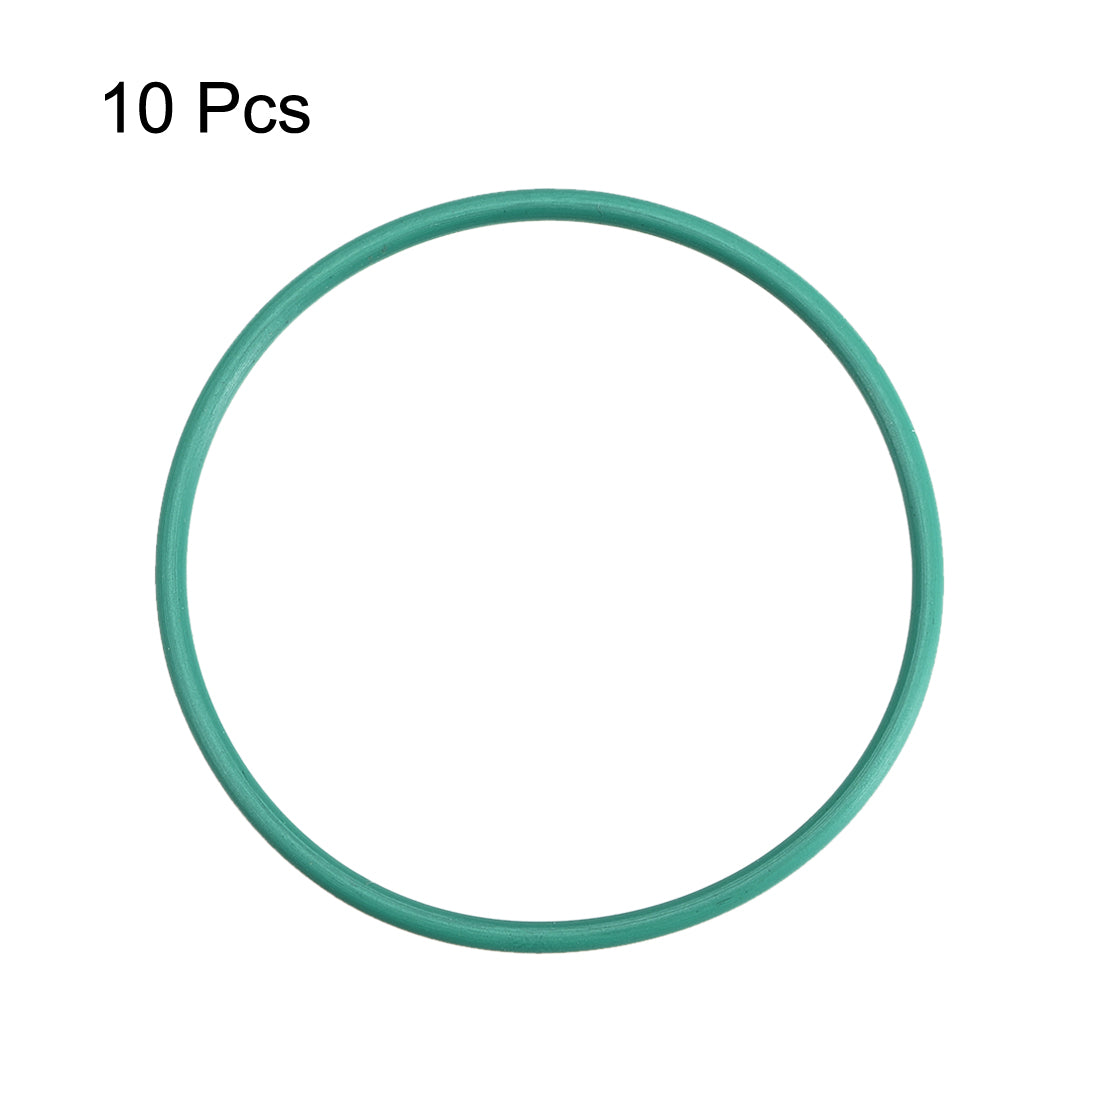 uxcell Uxcell 10pcs Green 35mm Outer Dia 1.5mm Thickness Sealing Ring O-shape Rubber Grommet